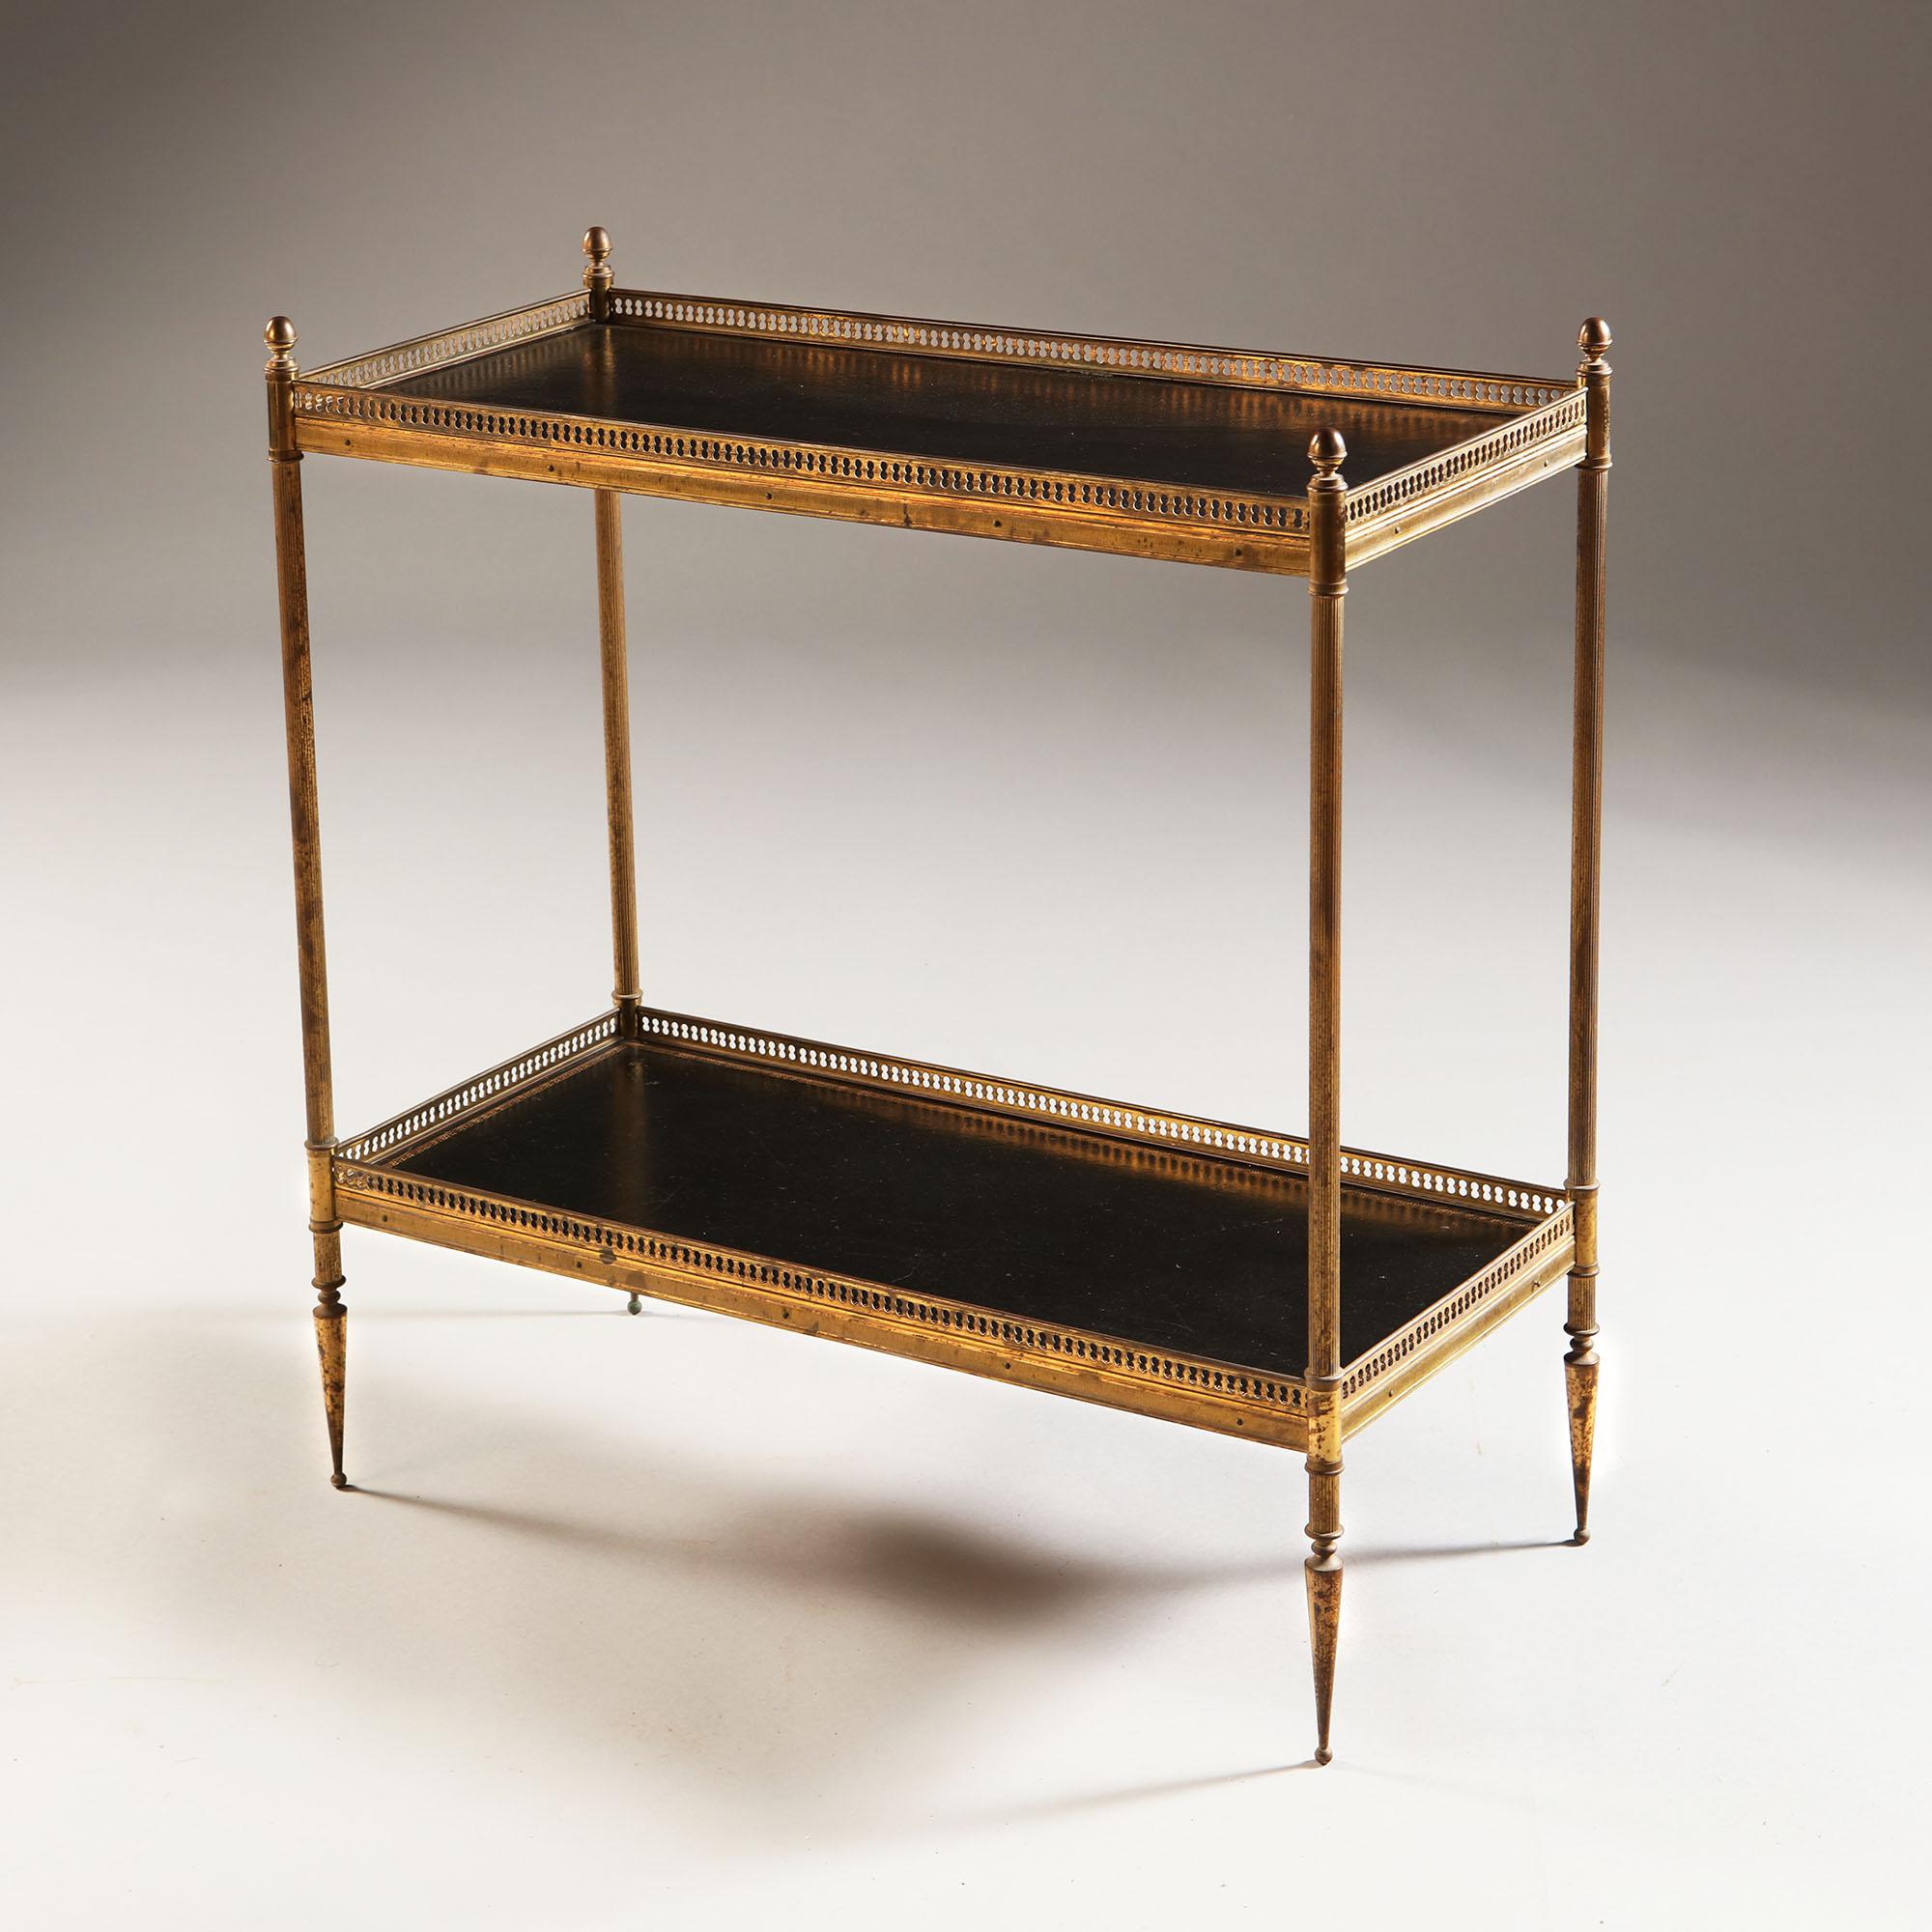 A pair of mid-20th century two tier etageres after Maison Bagues, with black leather tops with gilt tooling of a Greek key motif to the edges, with brass finials and pierced gallery to both levels, supported by fluted legs.